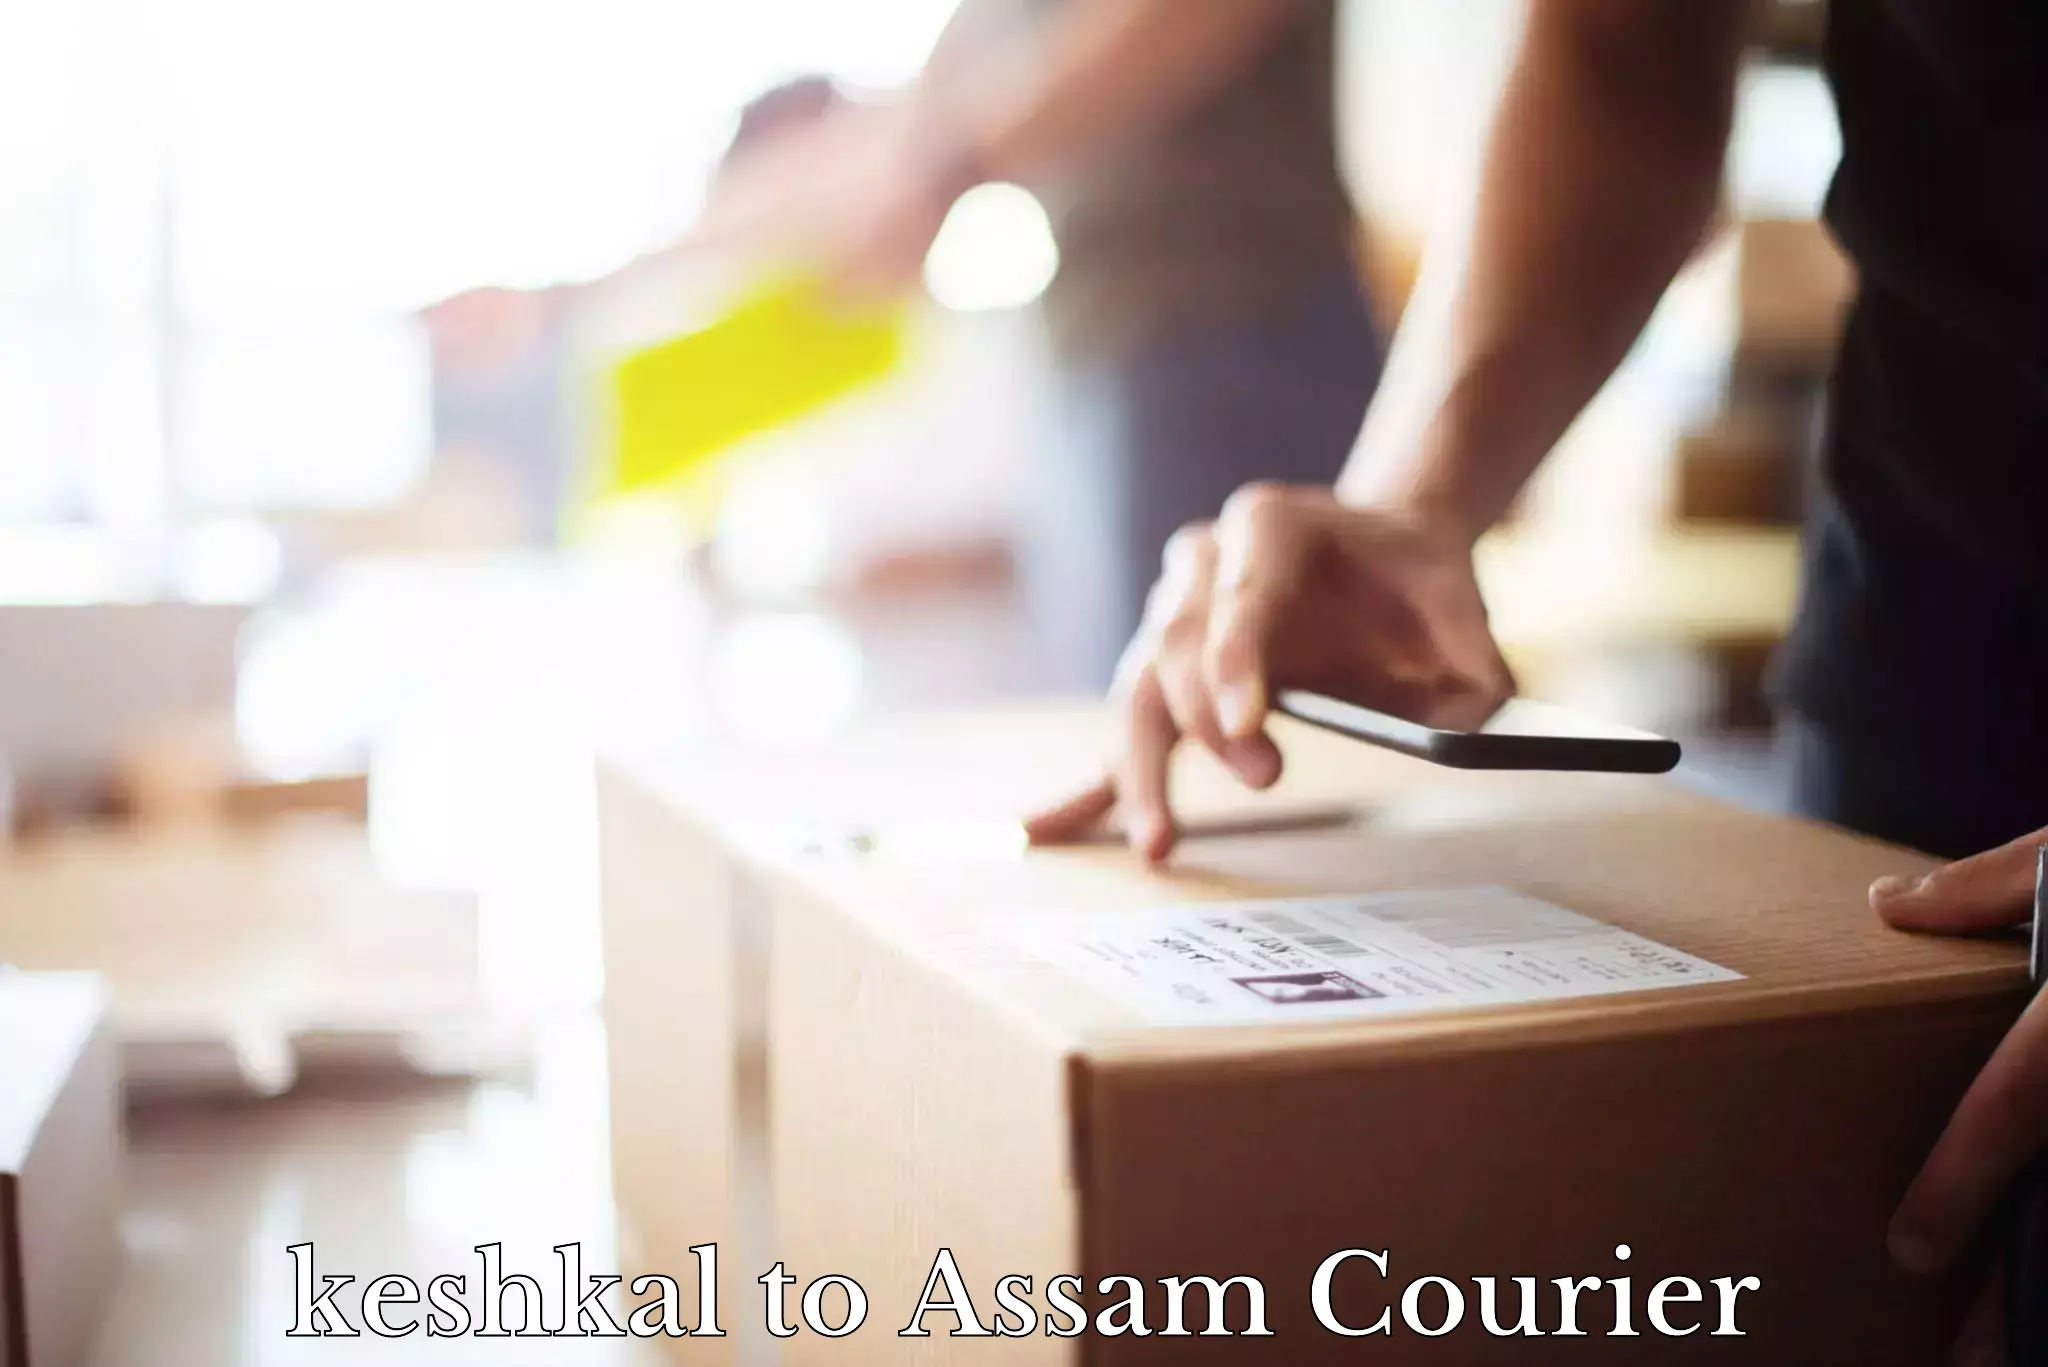 Reliable courier service keshkal to Rupai Siding